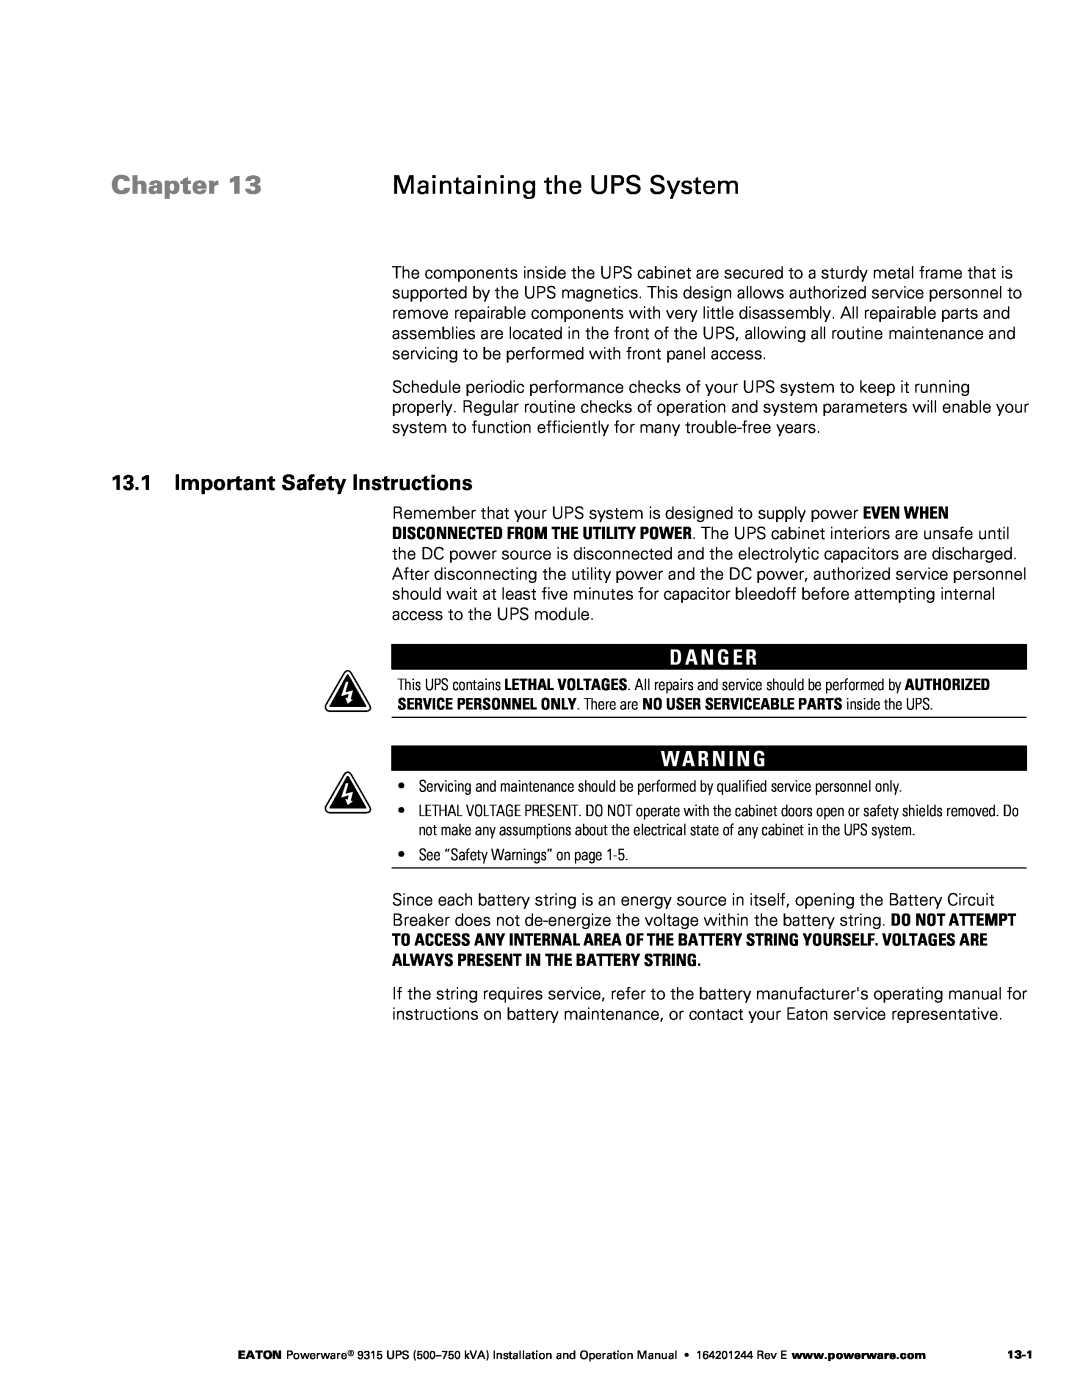 Powerware Powerware 9315 Maintaining the UPS System, Important Safety Instructions, Always Present In The Battery String 